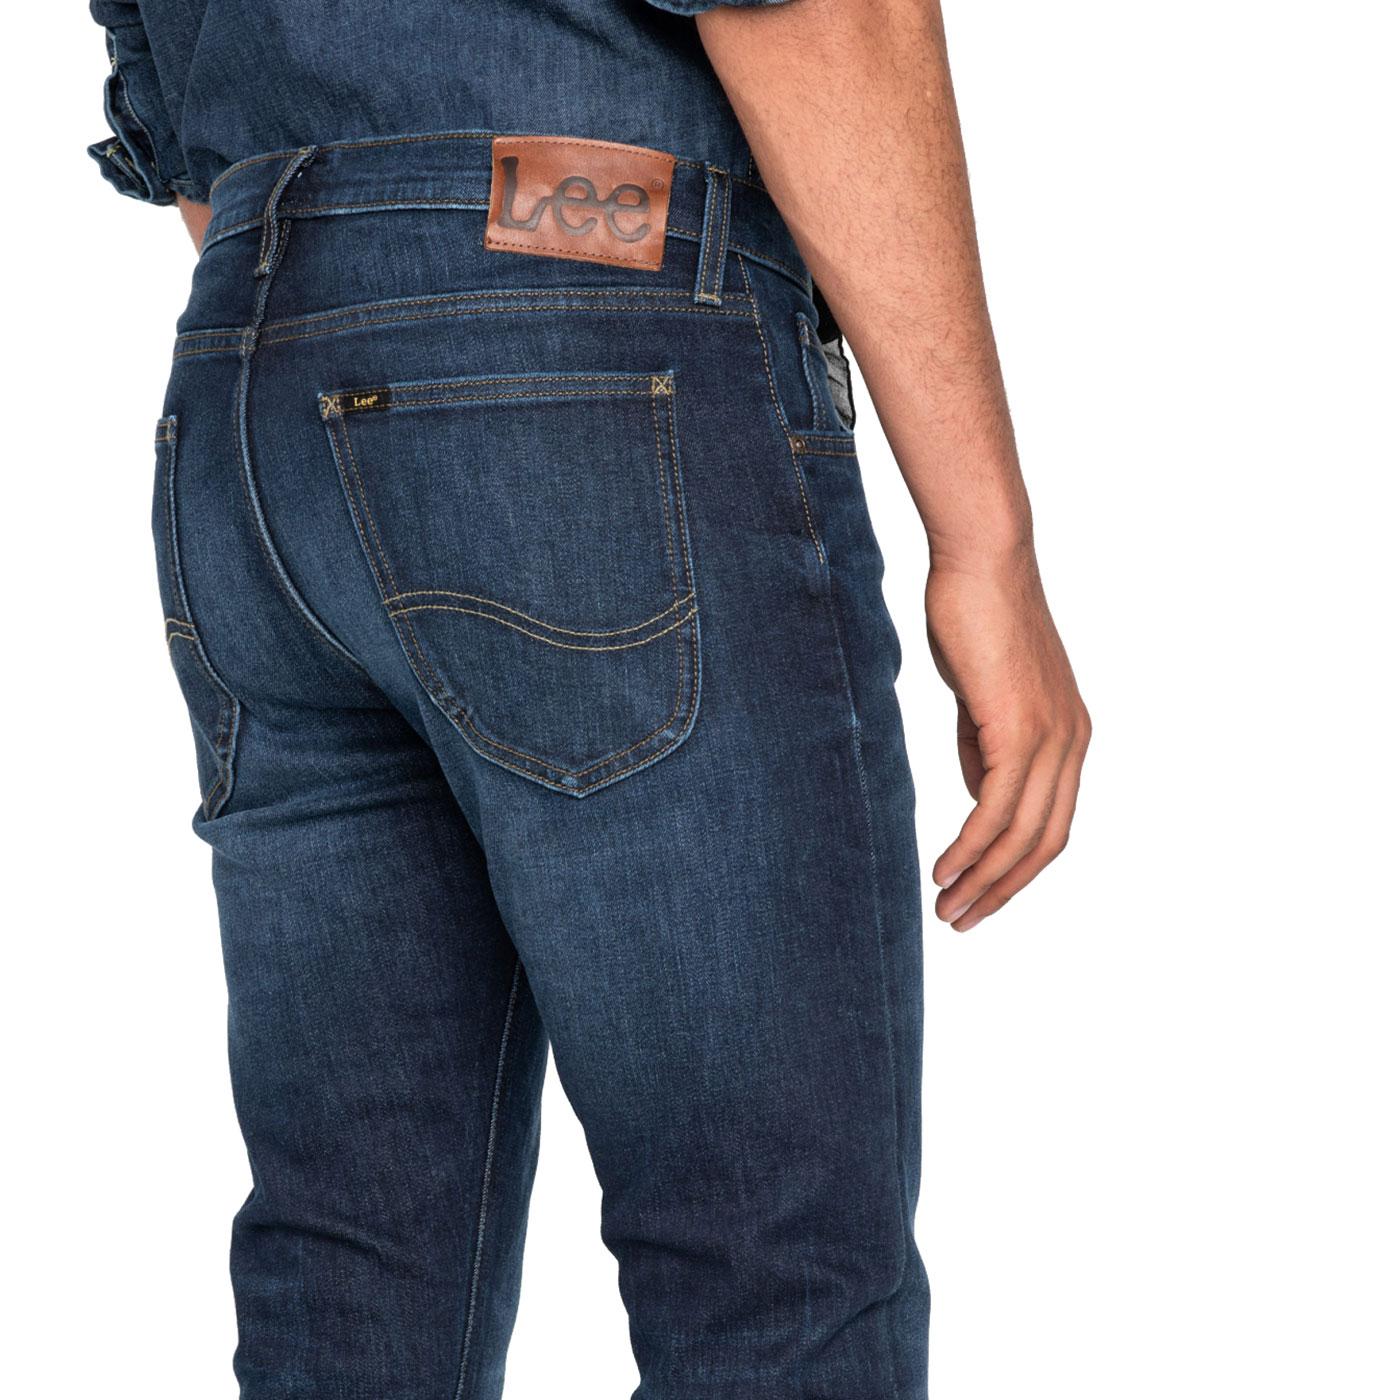 Jeans Hombre Lee Luke Power Stretch Azul Oscuro Slim Fit 